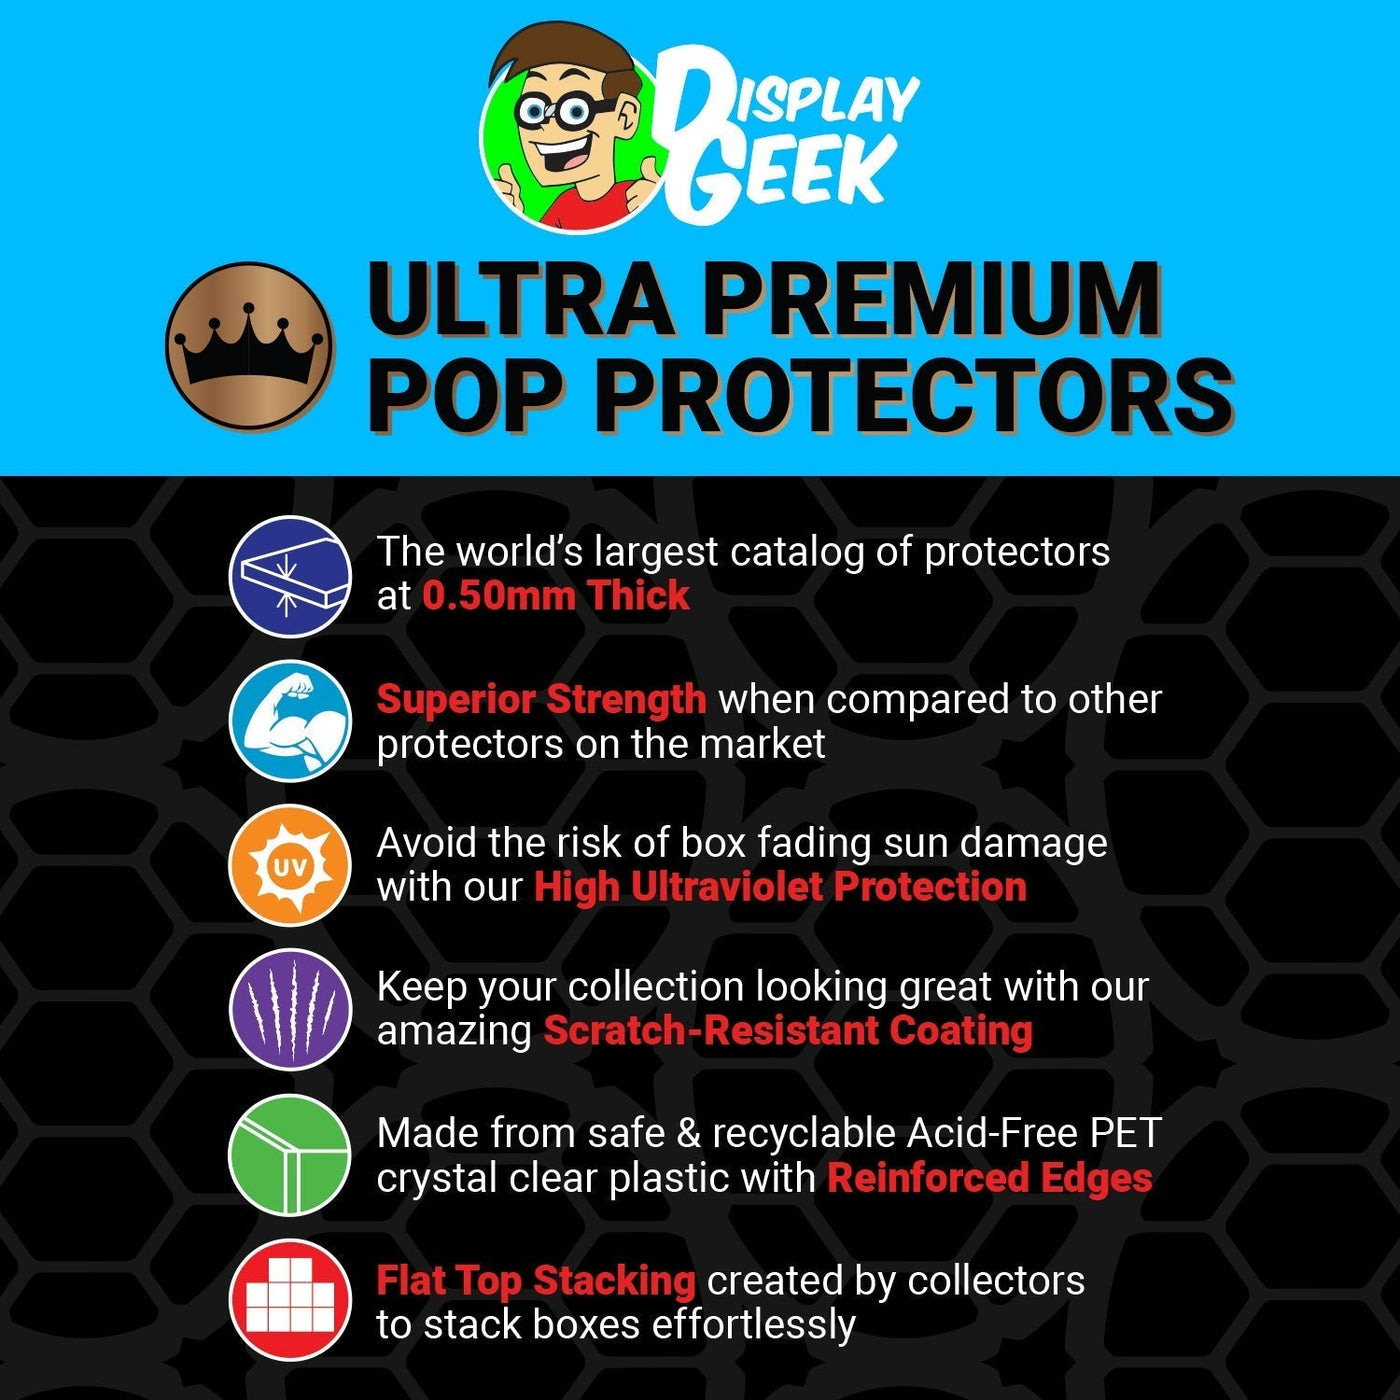 Pop Protector for Vynl 2 Pack Steve & Ned ECCC Funko on The Protector Guide App by Display Geek